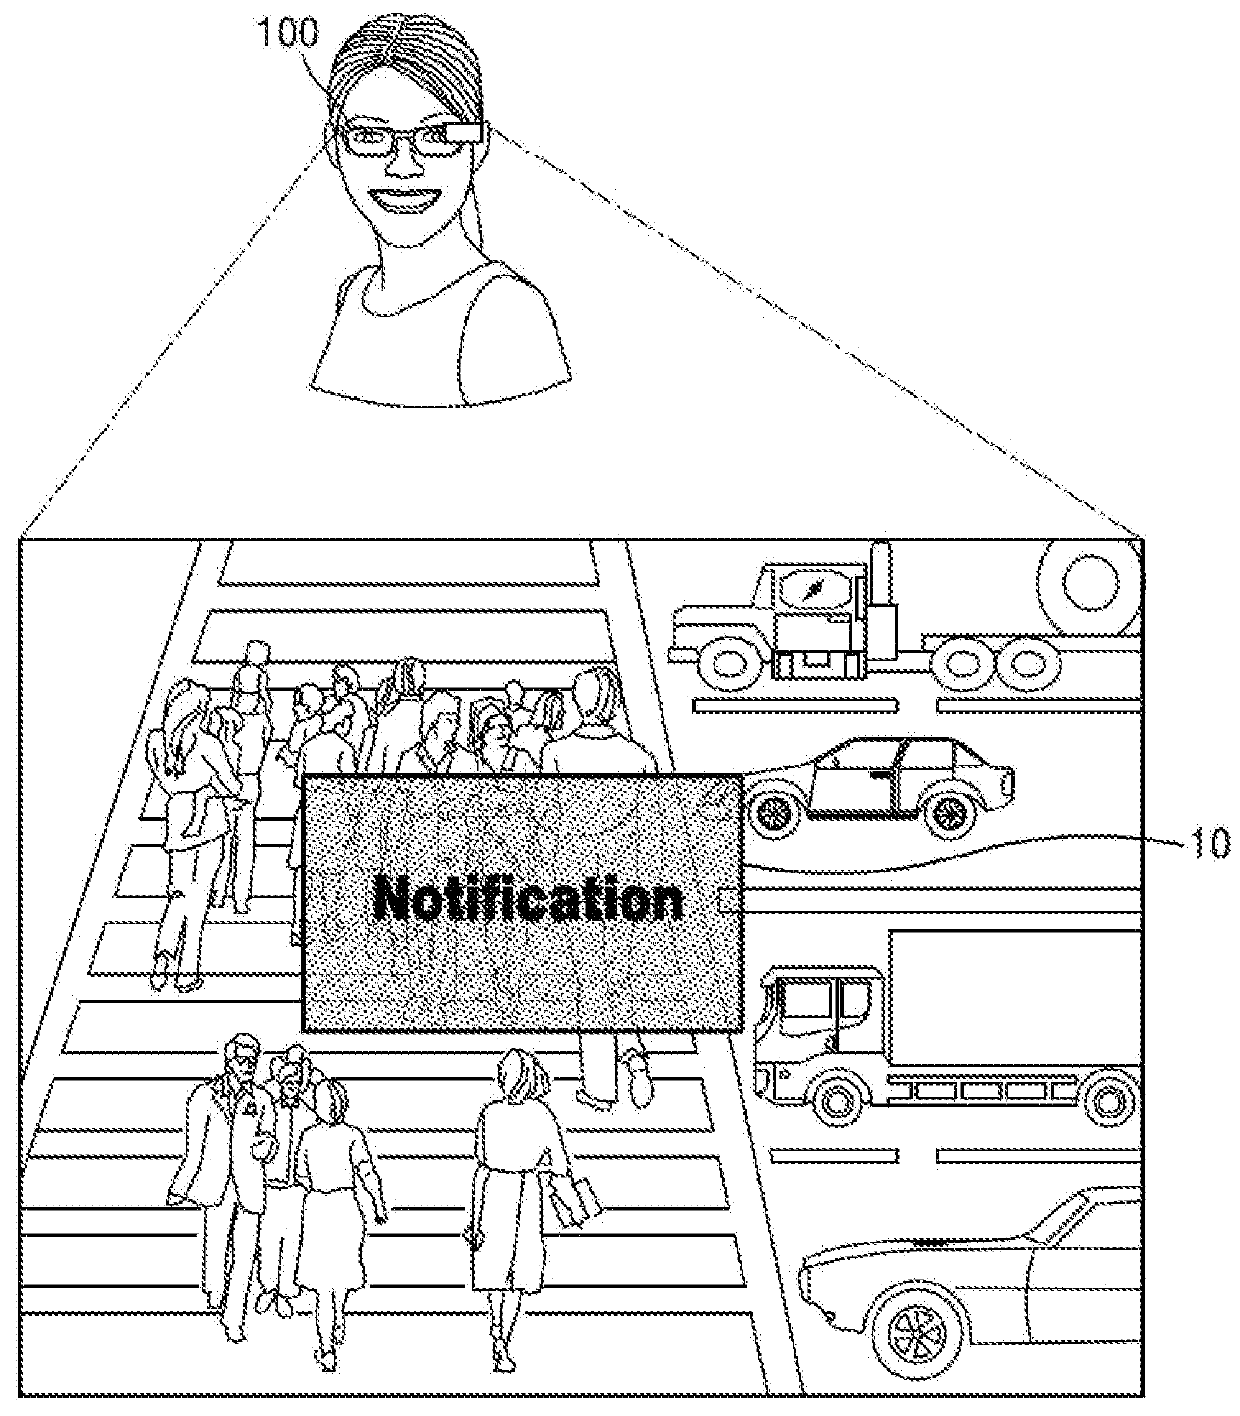 Wearable glasses and method of providing content using the same